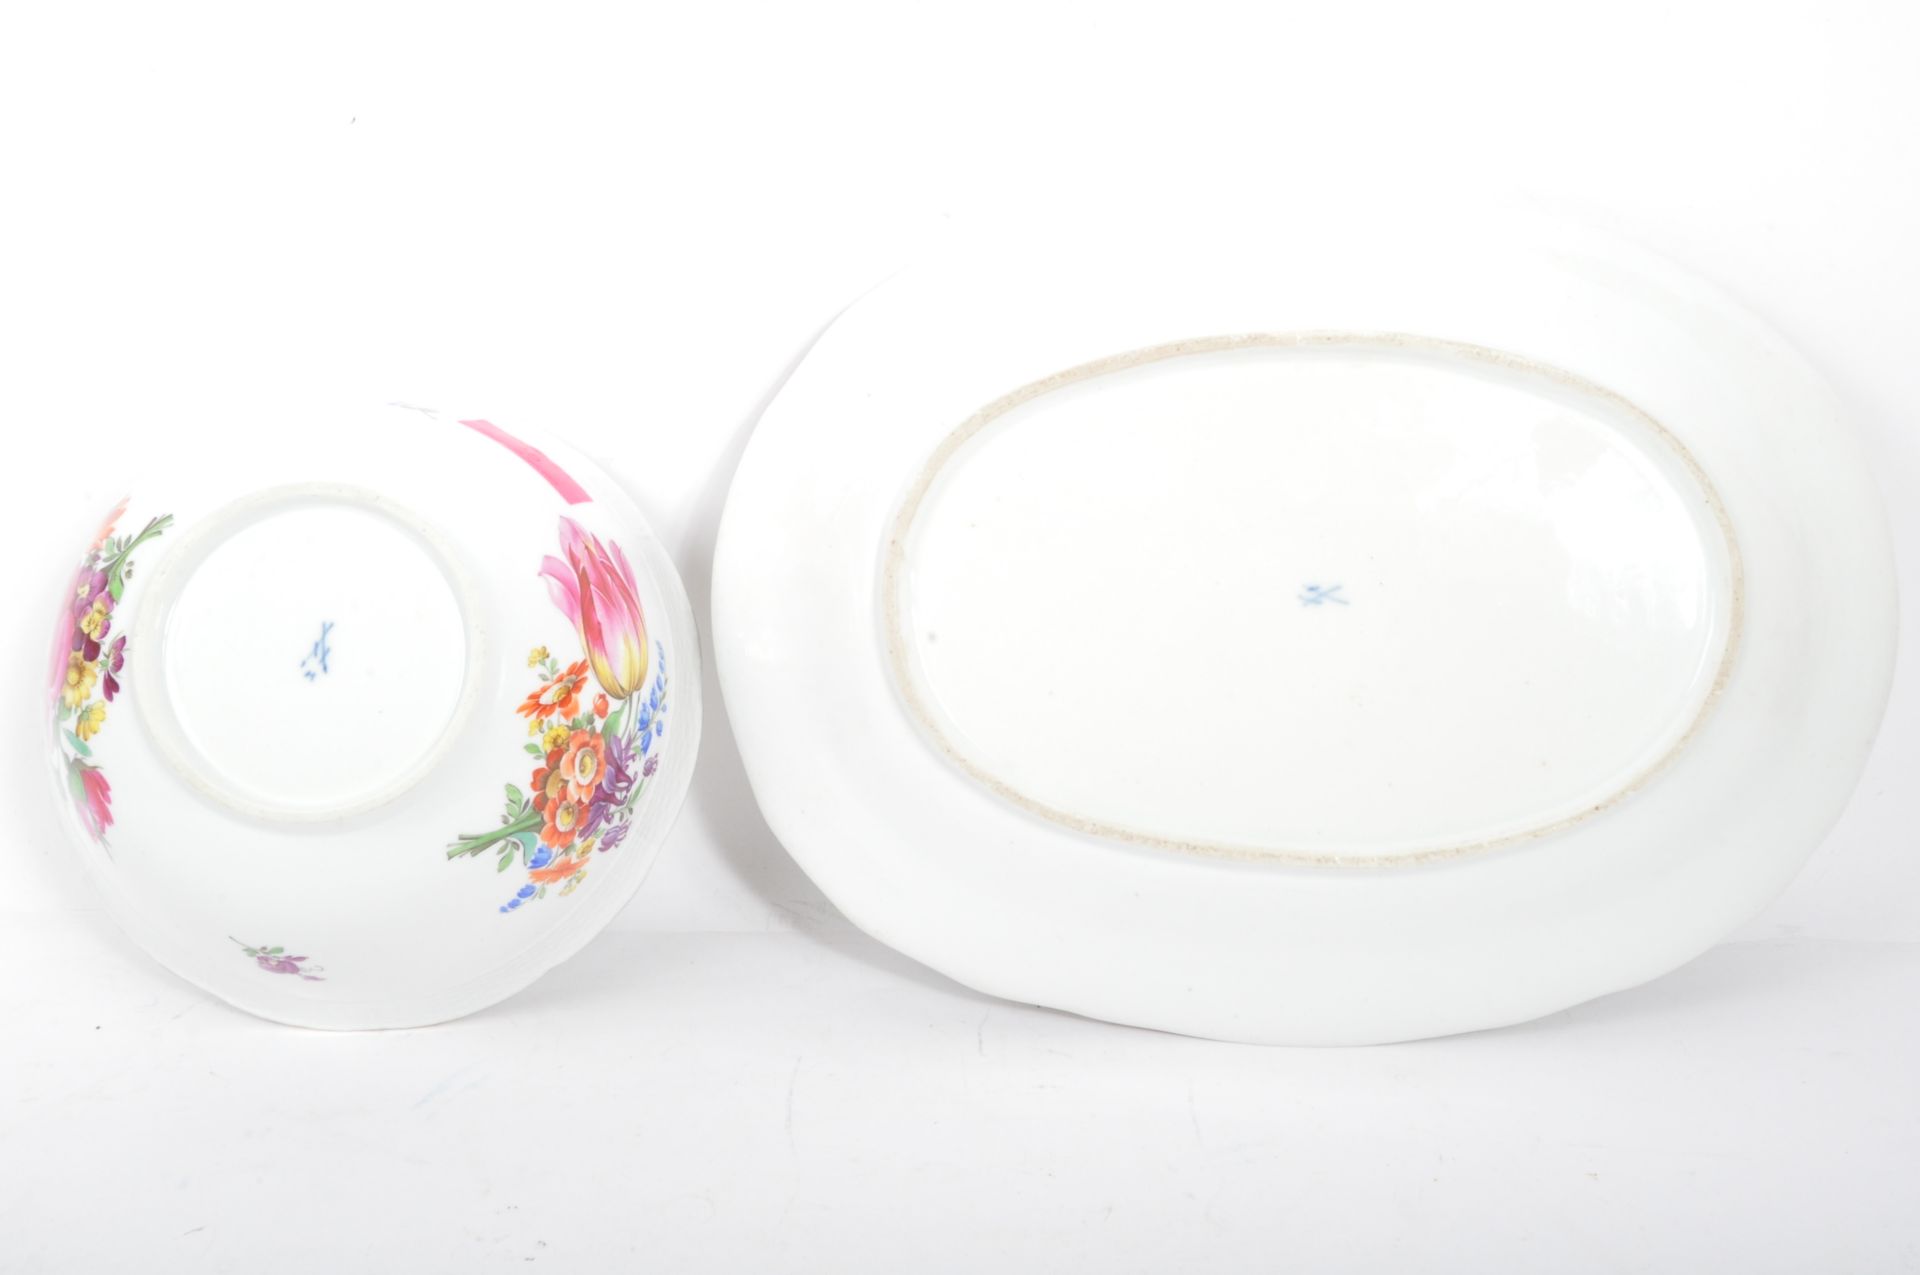 TWO 19TH CENTURY GERMAN MEISSEN PORCELAIN PLATE & BOWL - Image 4 of 6